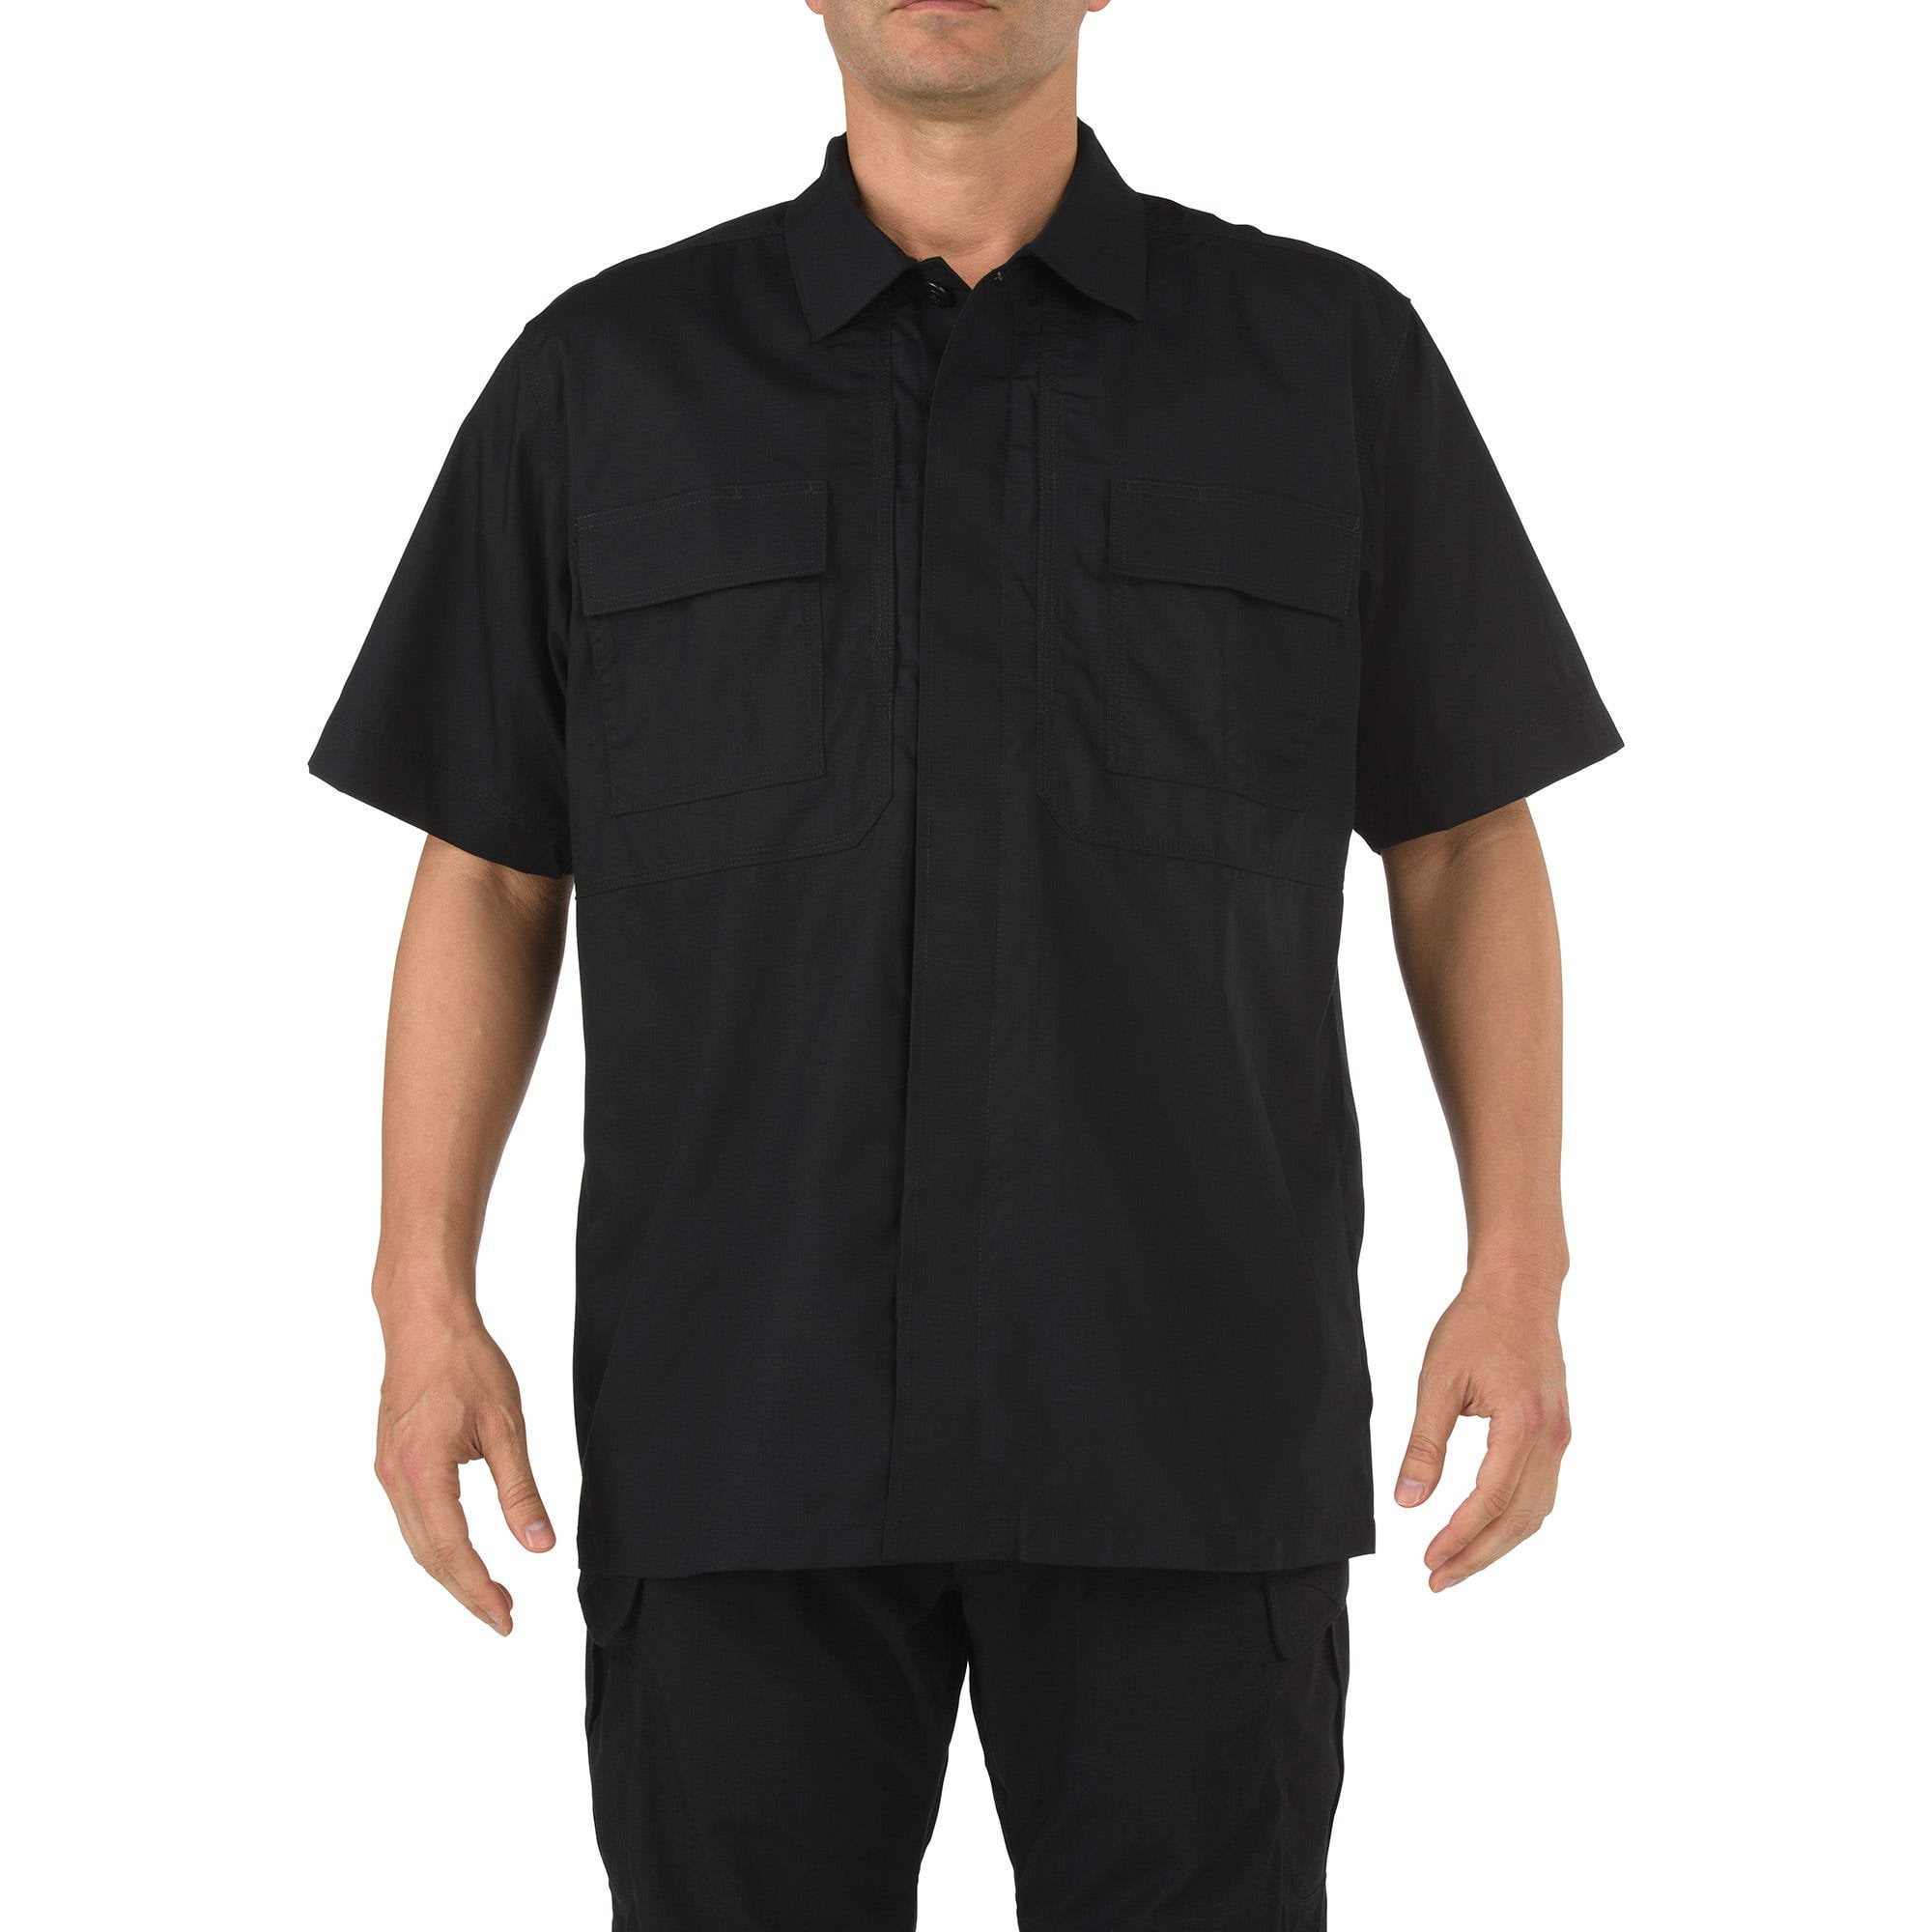 Style 71339T Breathable and Treated Fabric 5.11 Tactical Men's TDU Short Sleeve Polo Shirt